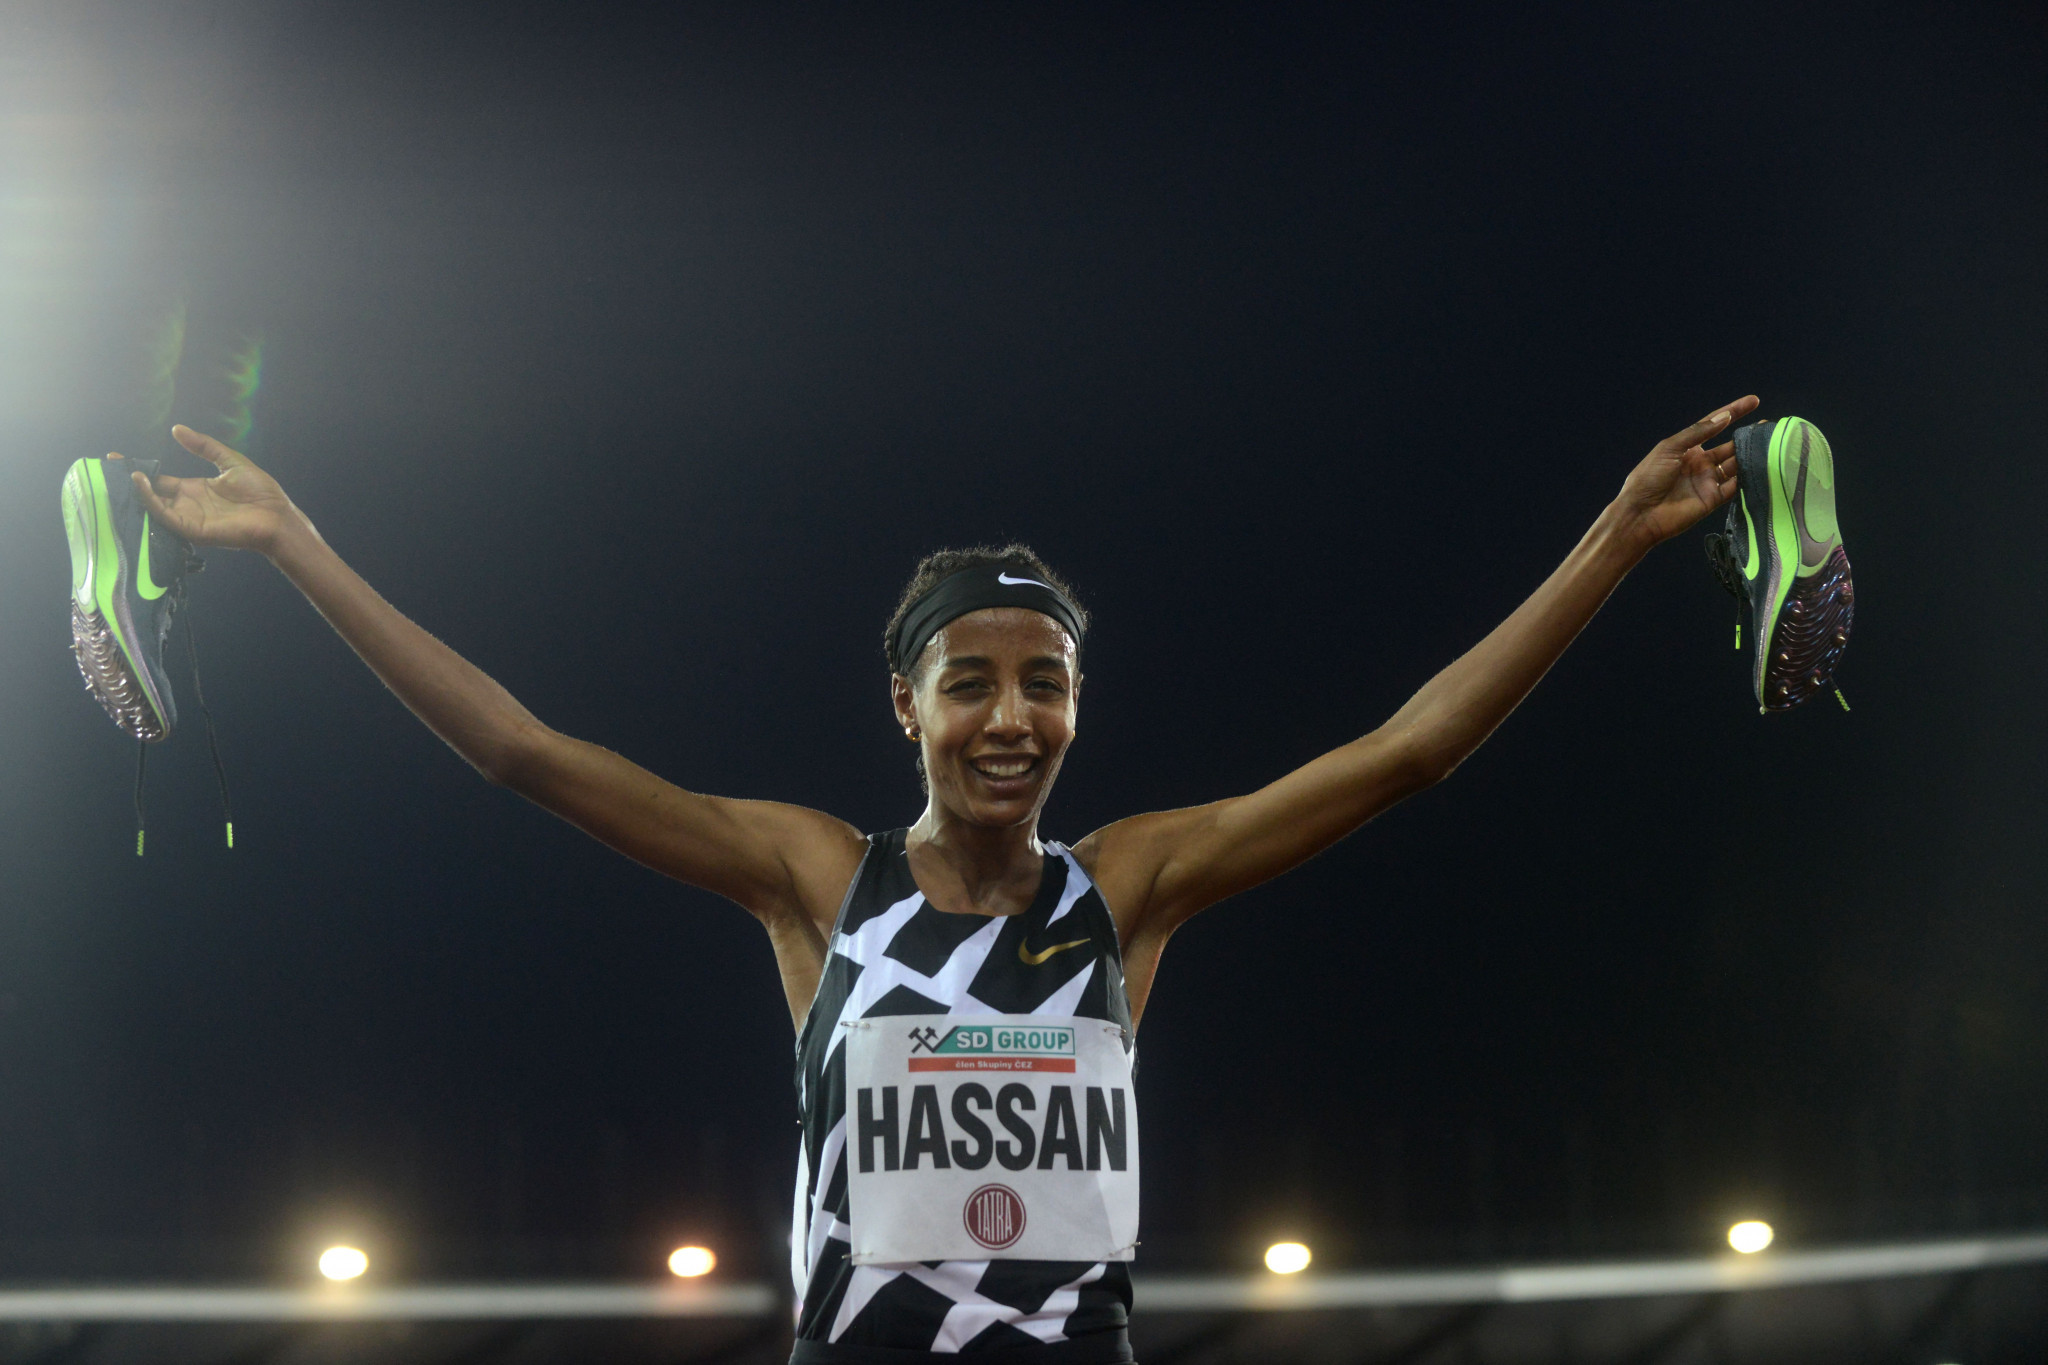 Sifan Hassan ran a season's best in the women's 5000m ©Getty Images